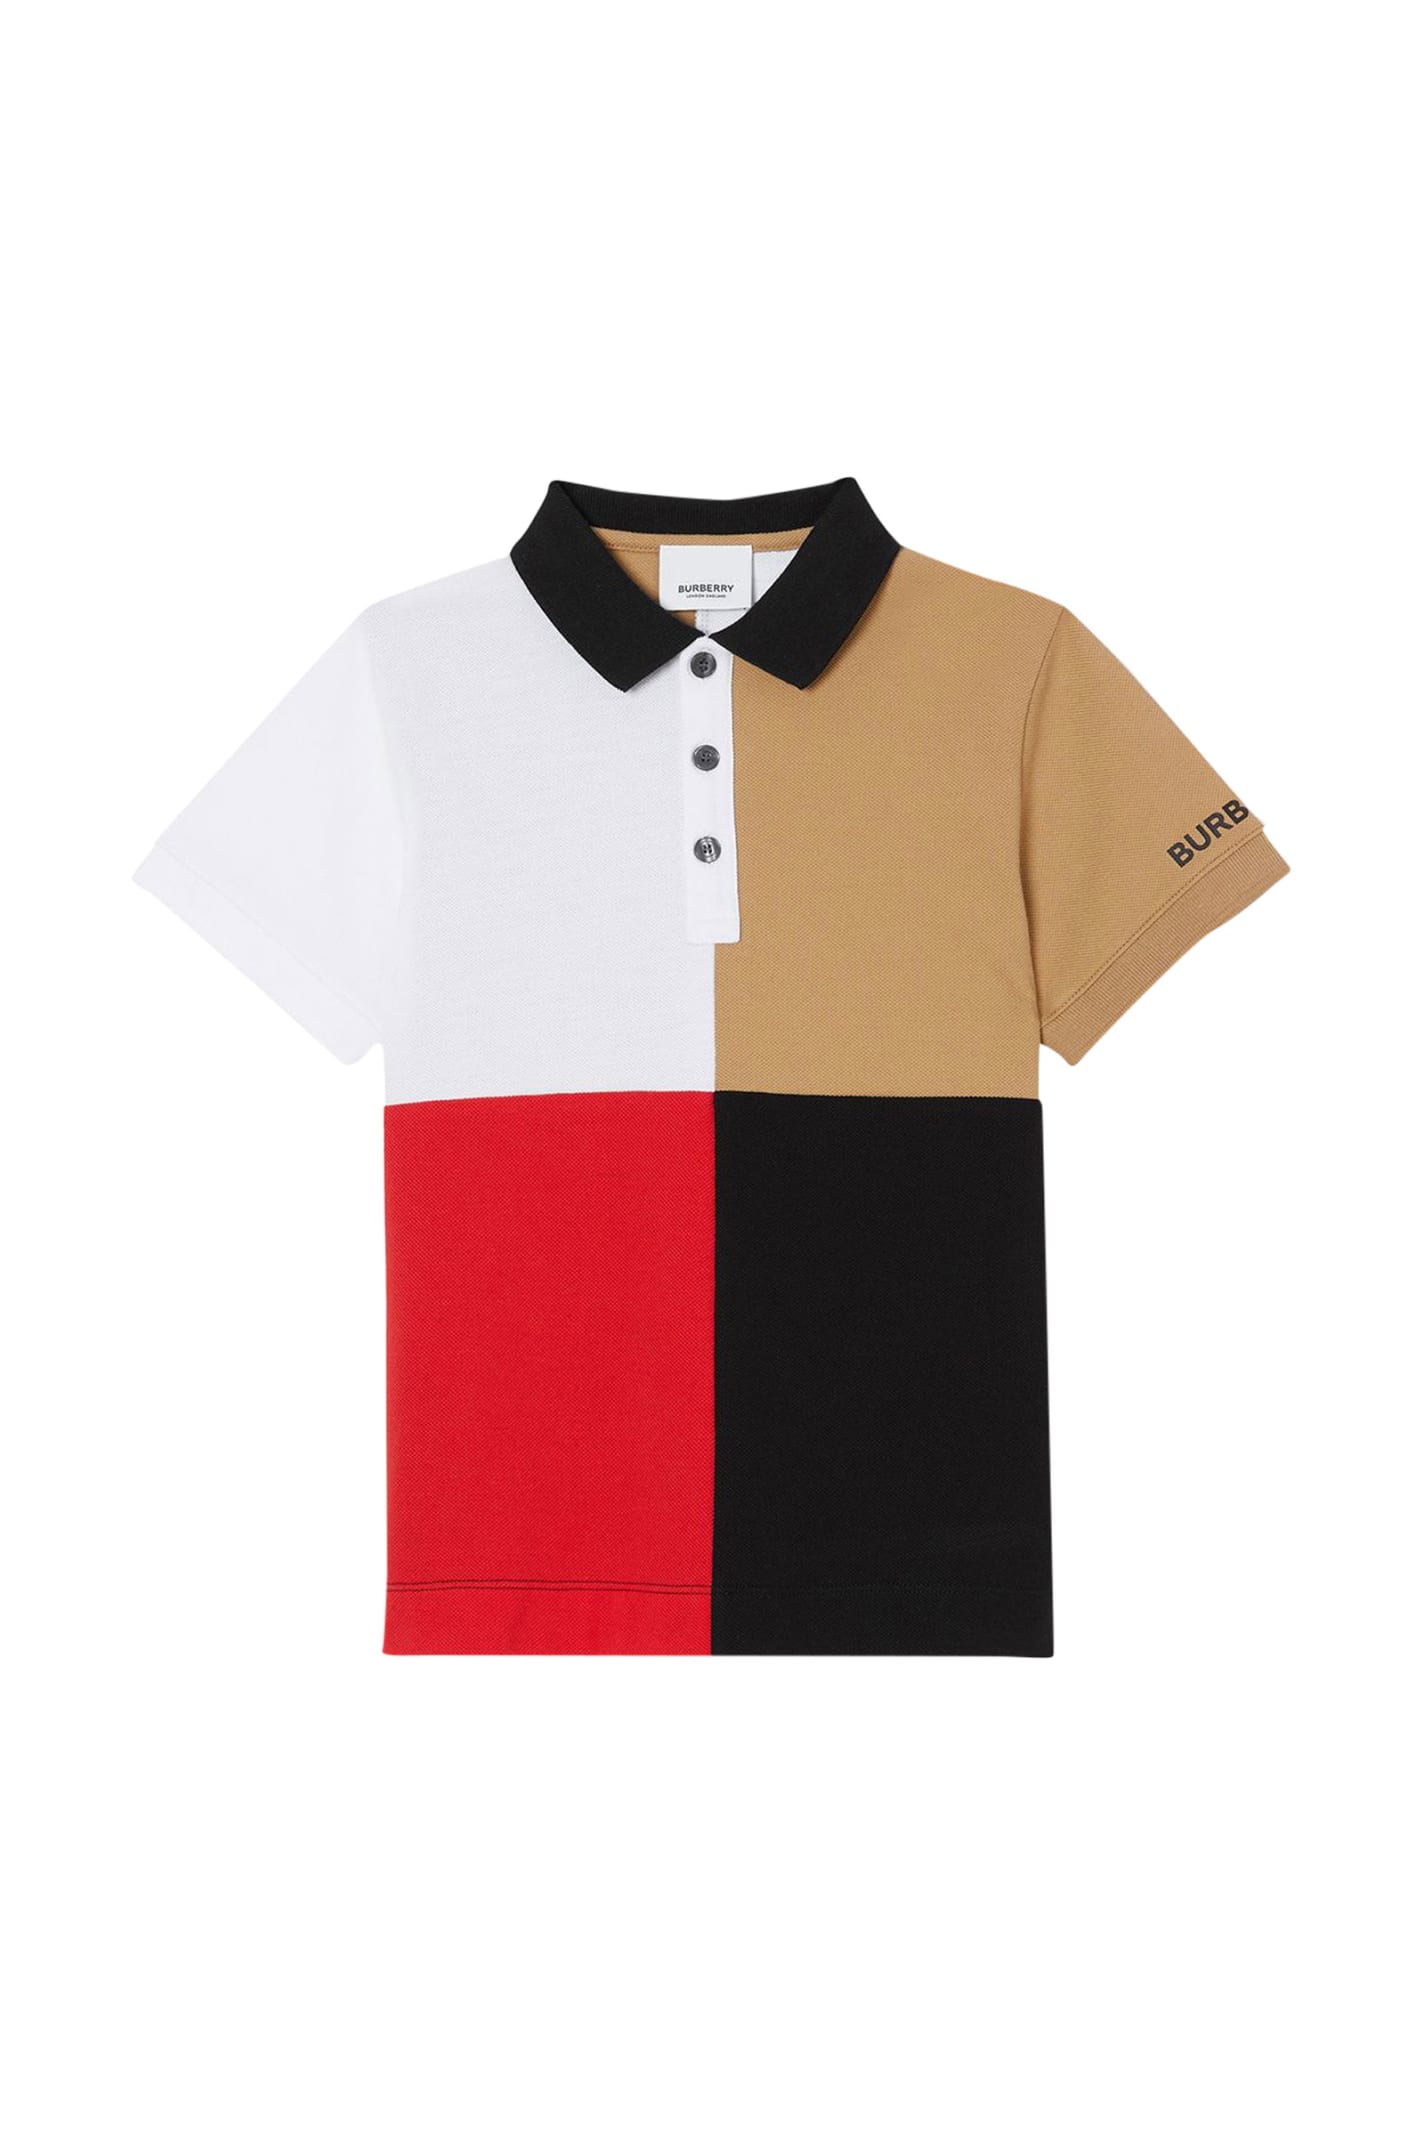 BURBERRY KIDS POLO WITH COLOR-BLOCK DESIGN,11241340